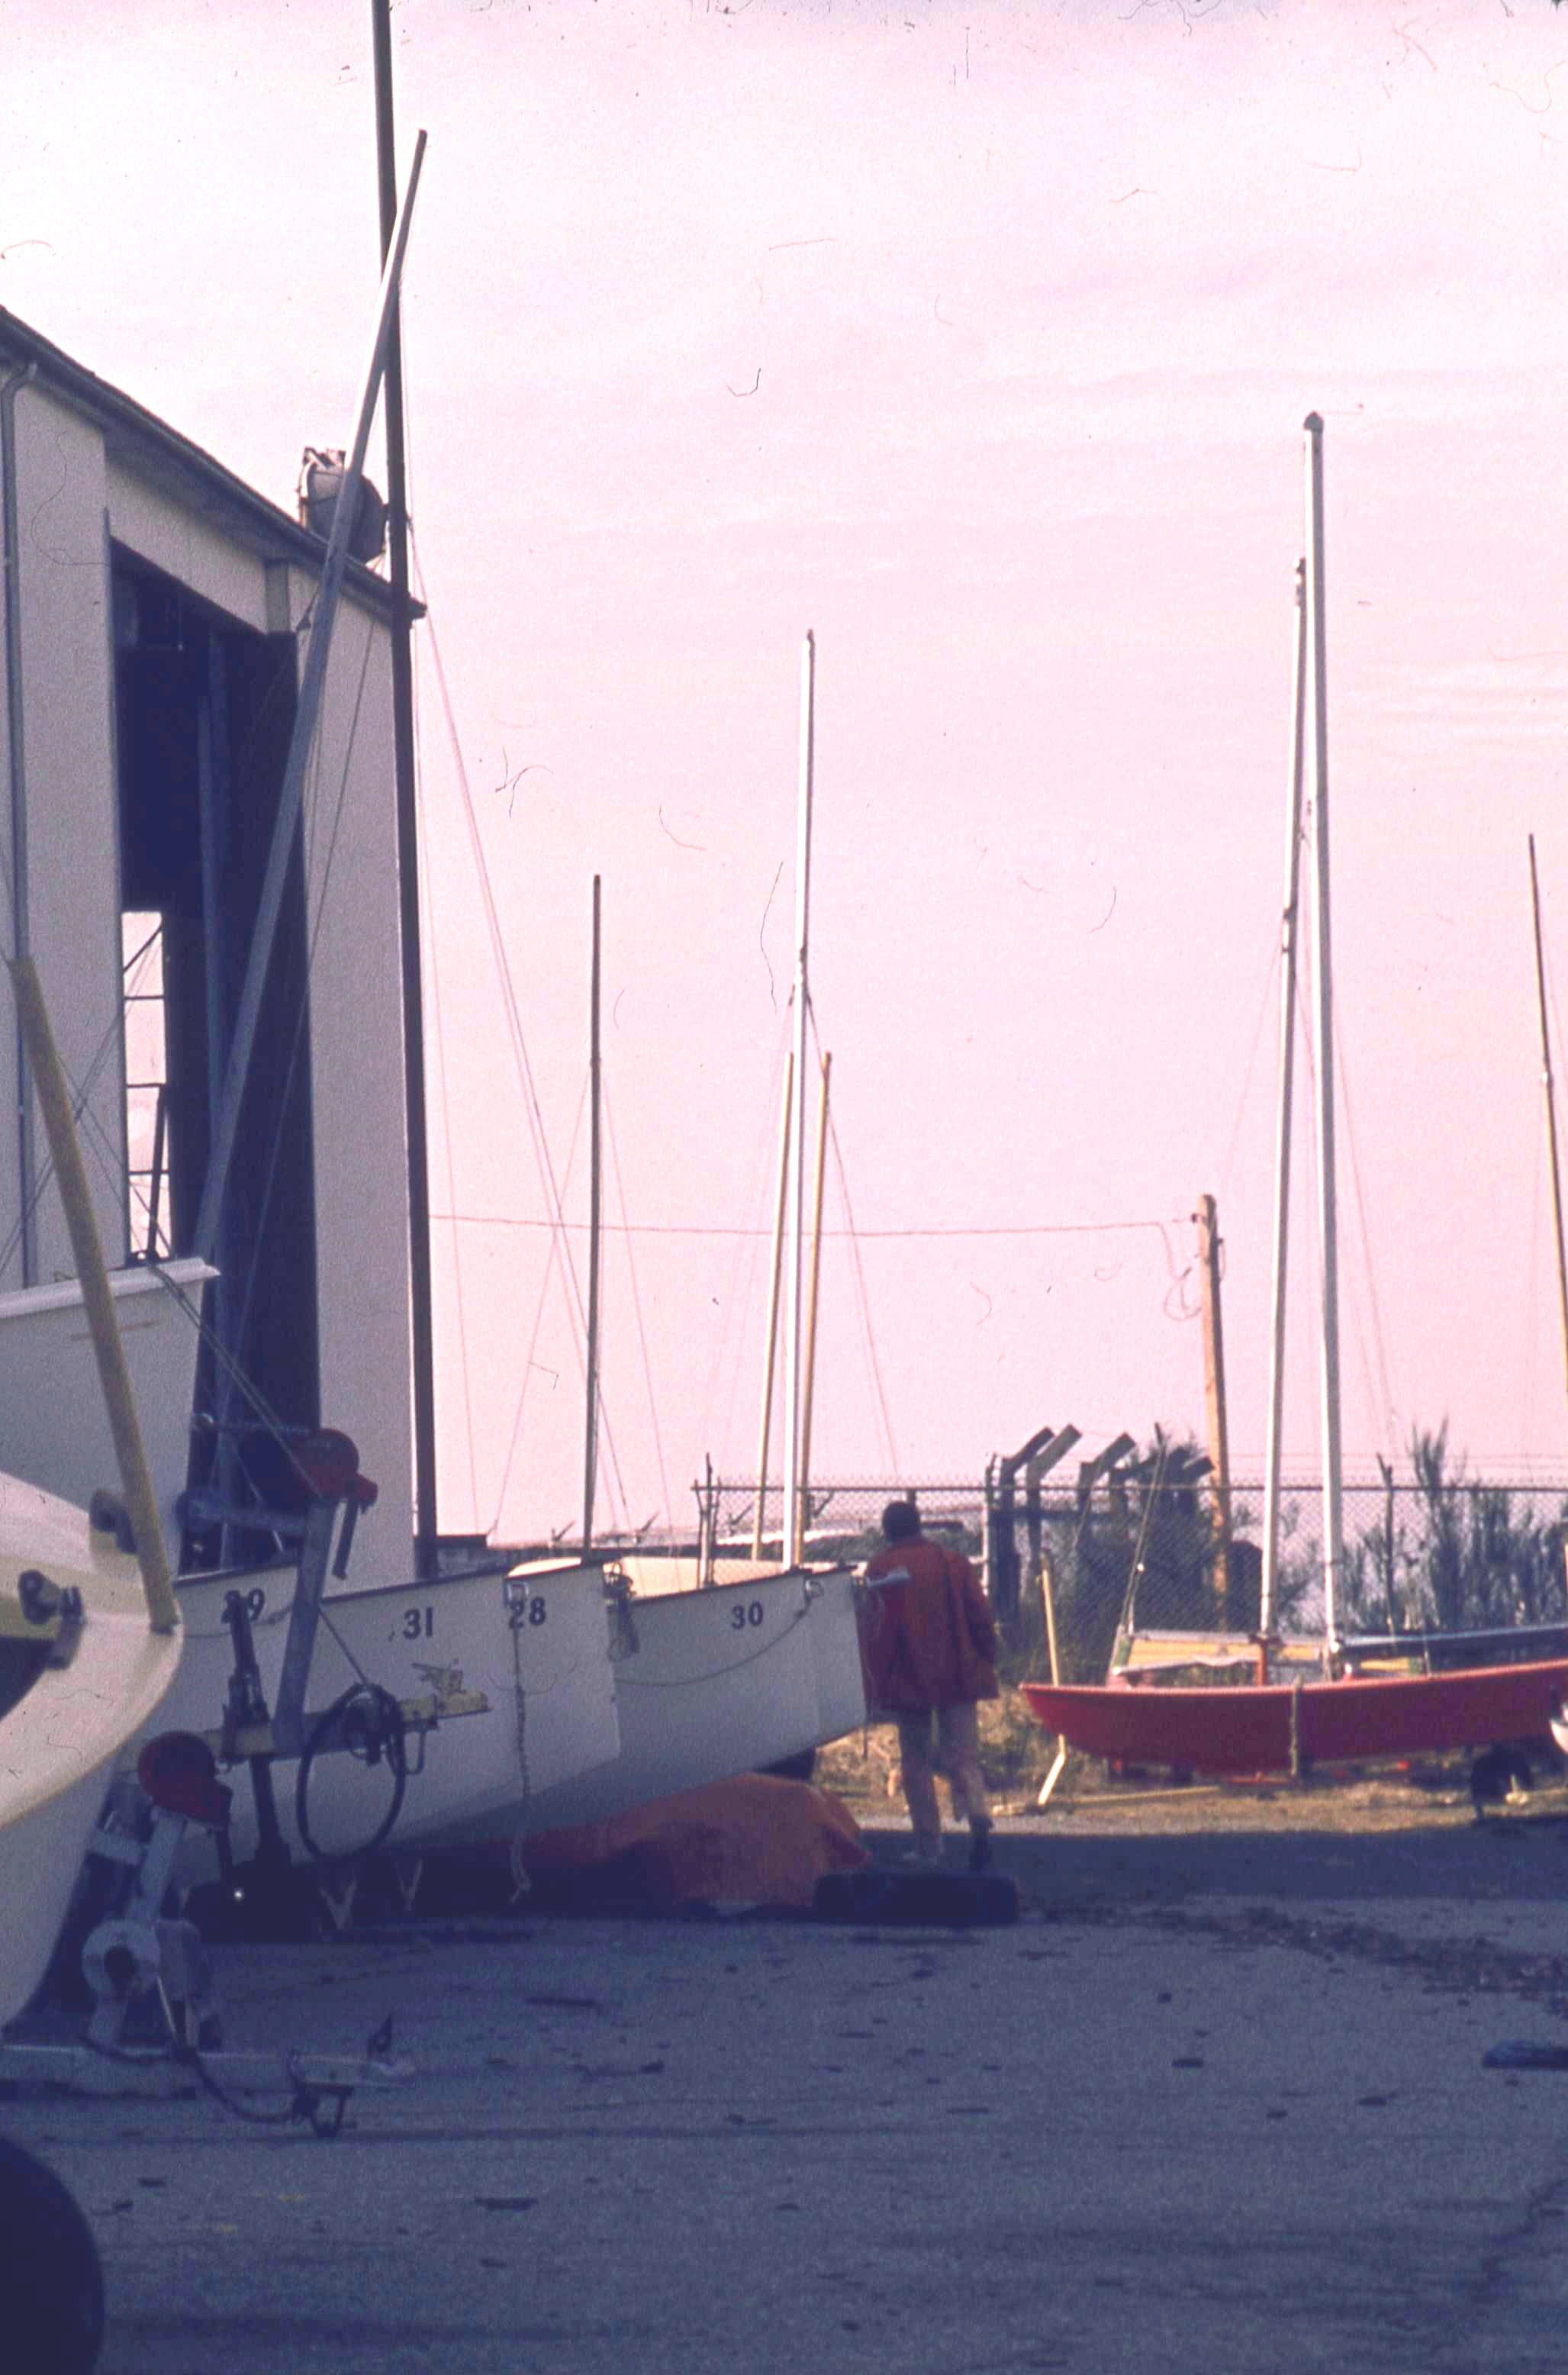 Summer of 1976: Sunset at the newly opened Jericho Sailing Center, boats are being stowed for the night. 